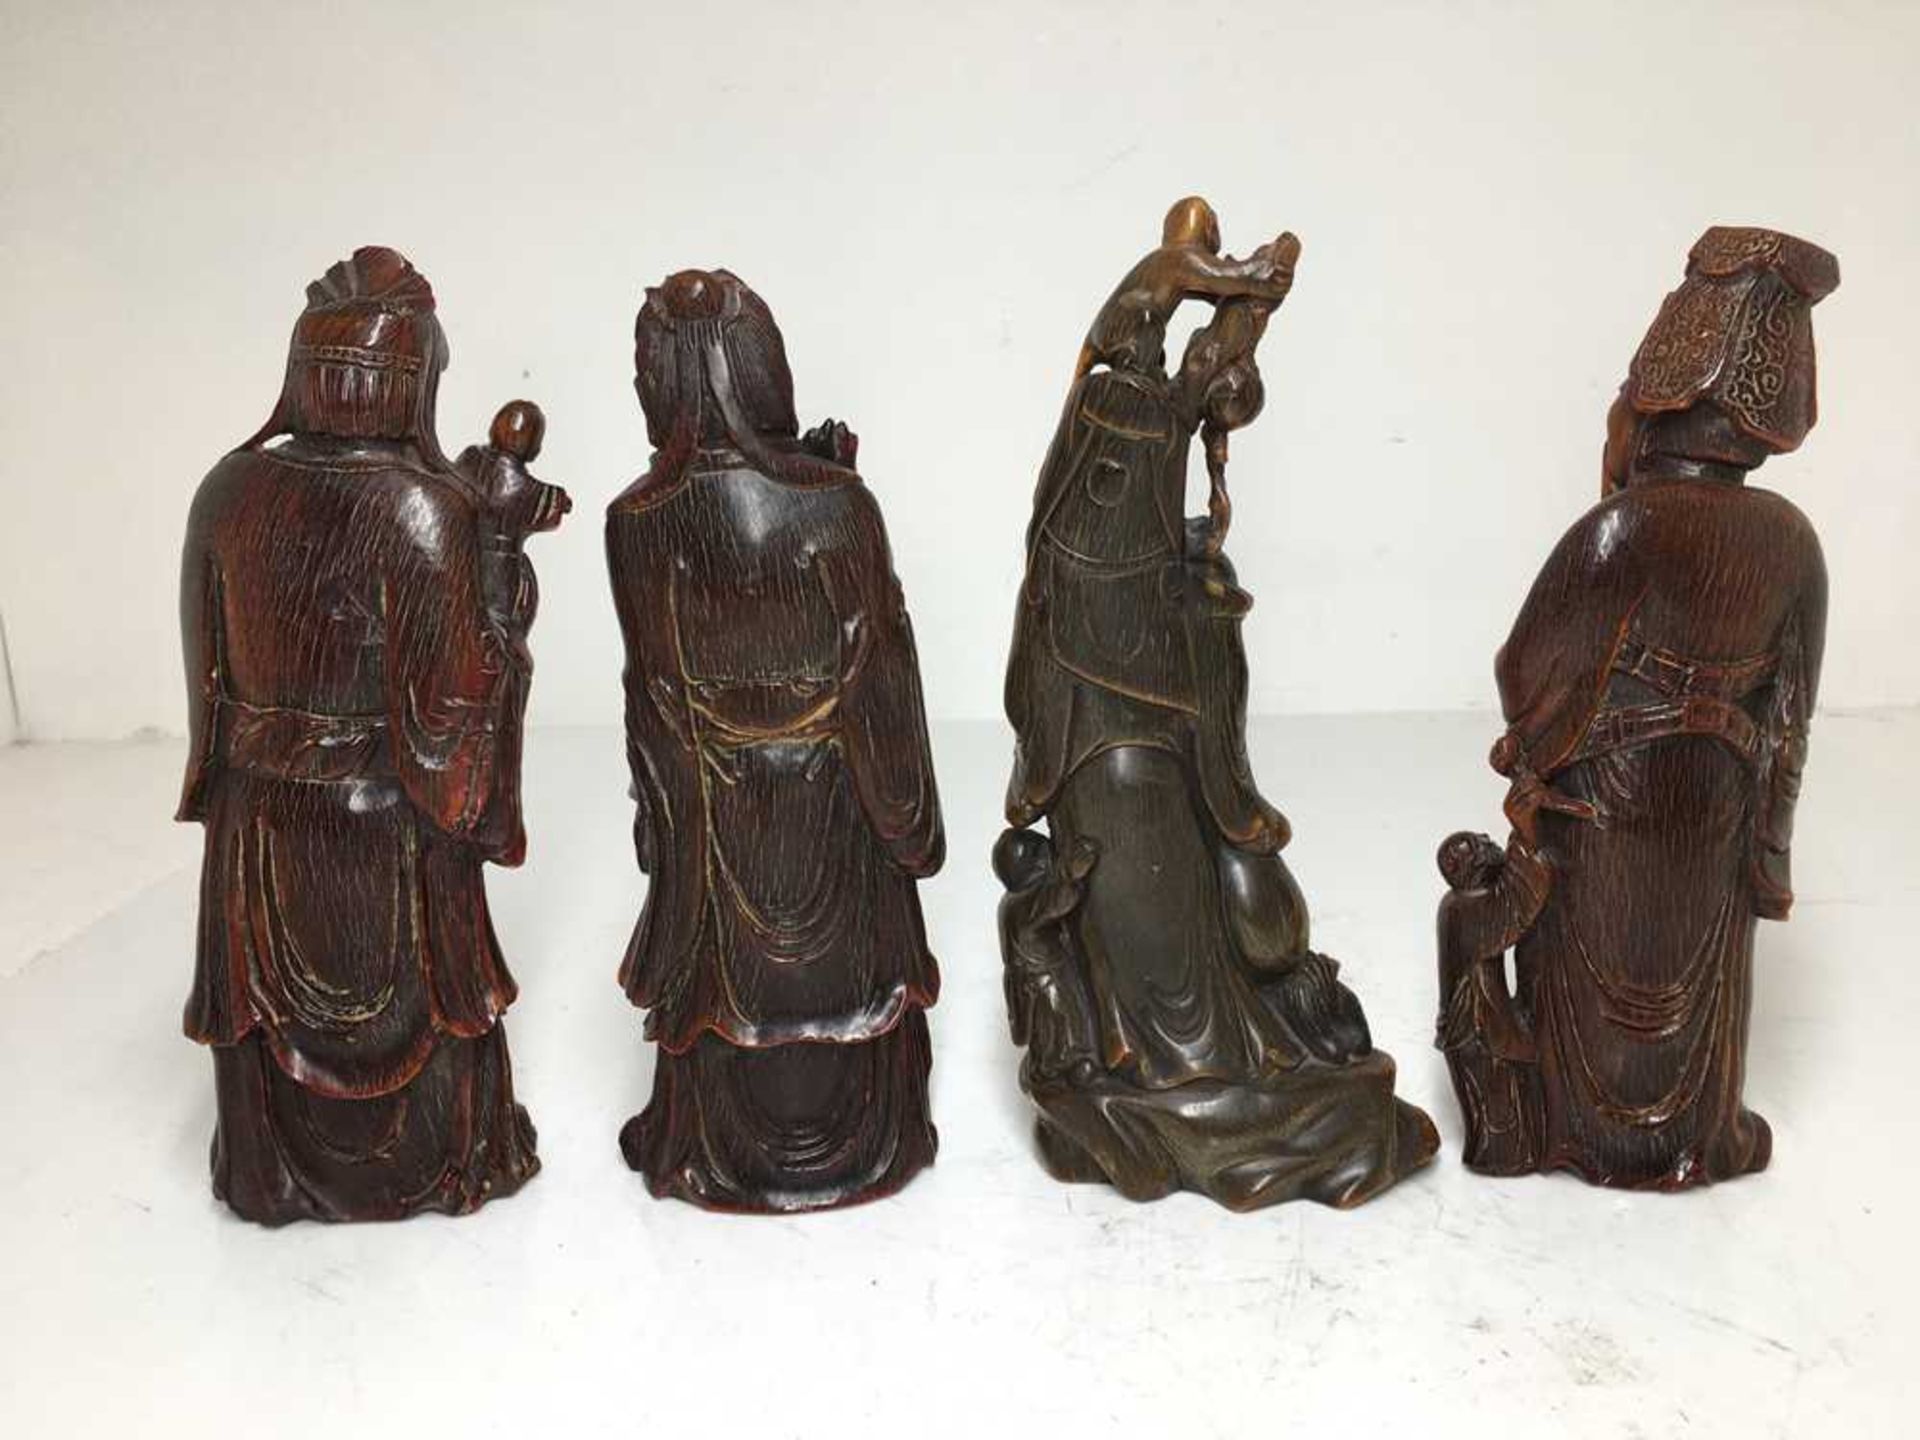 GROUP OF SIX CARVED BUFFALO HORN FIGURES 19TH-20TH CENTURY - Image 12 of 26